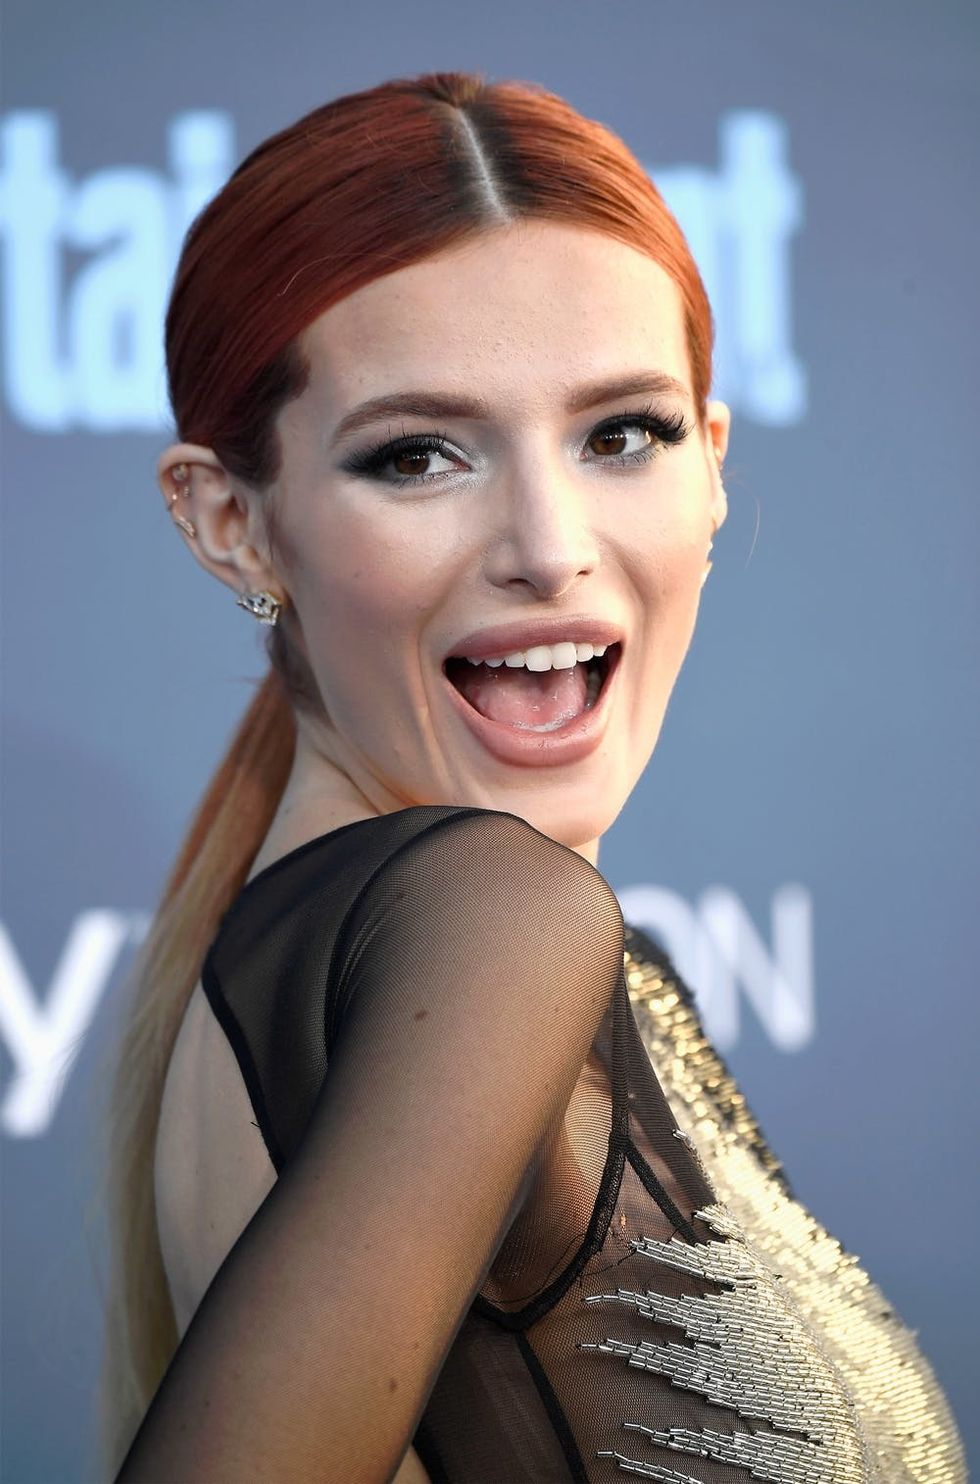 Bella Thorne Just Got a Tiny Tattoo in a Very Unexpected Place - Img